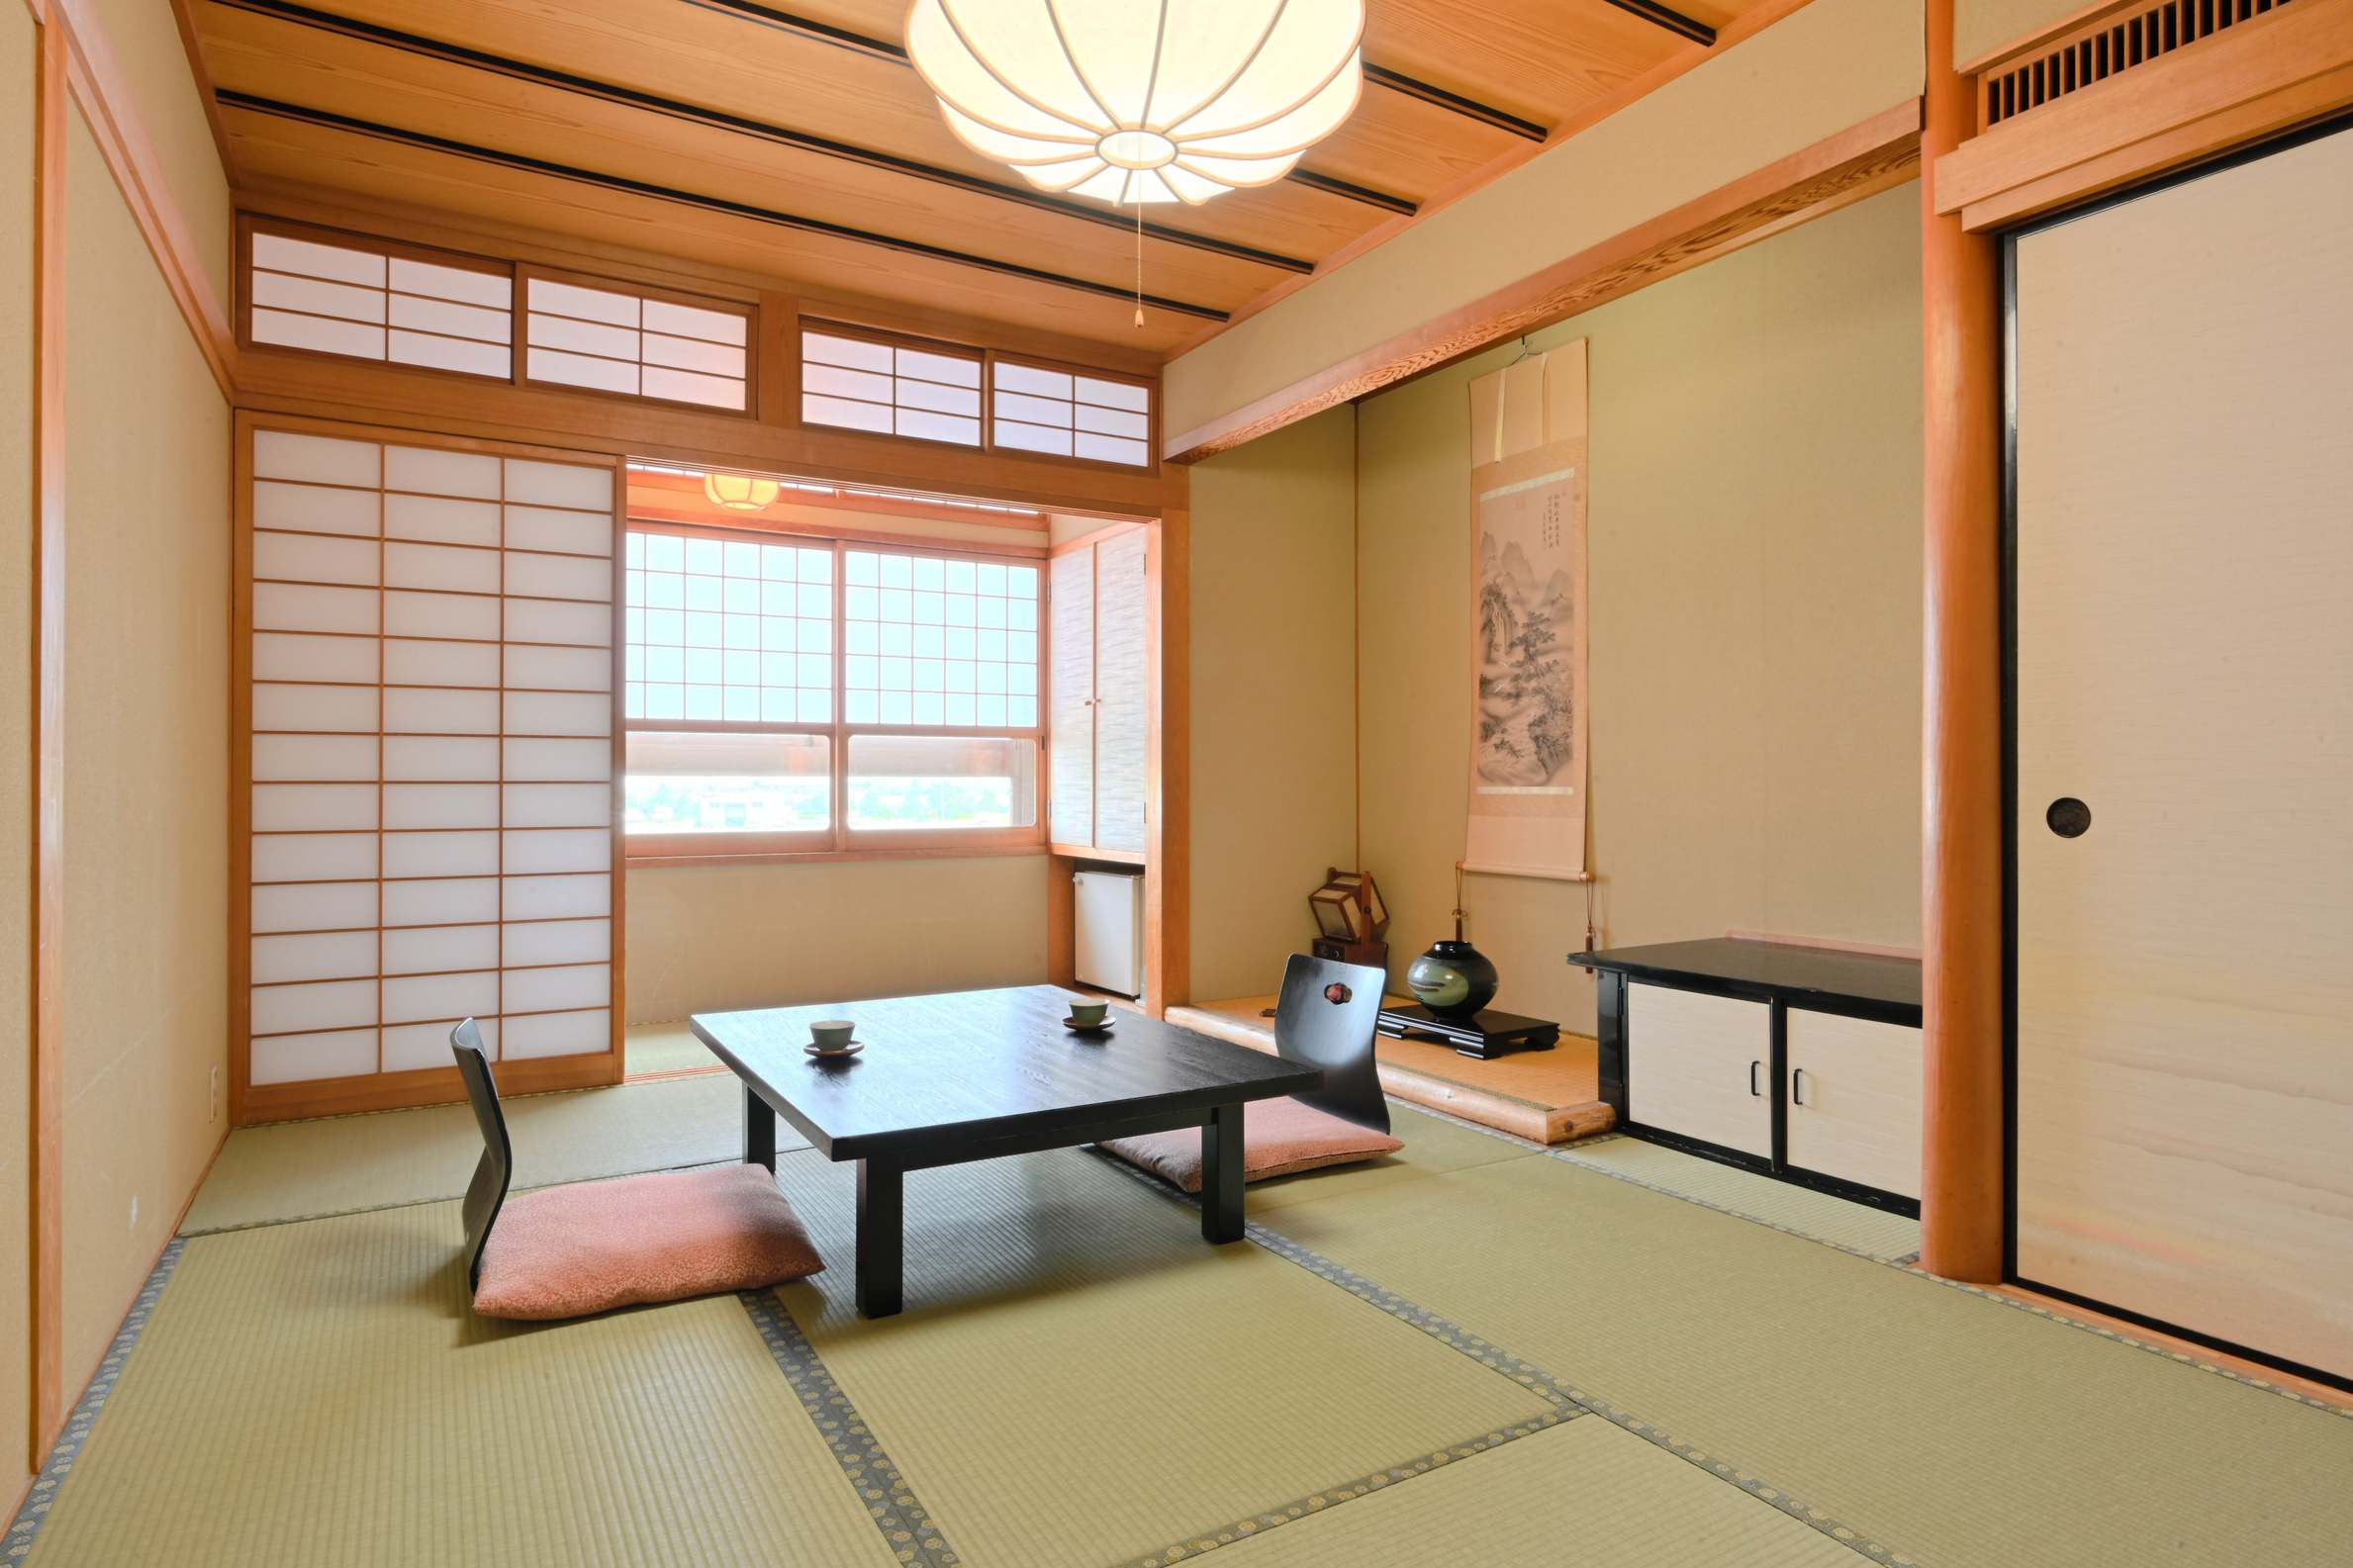 Mikaku no Oyado Yamadaya Mikaku no Oyado Yamadaya is conveniently located in the popular Tottori area. The property offers a high standard of service and amenities to suit the individual needs of all travelers. Service-minded